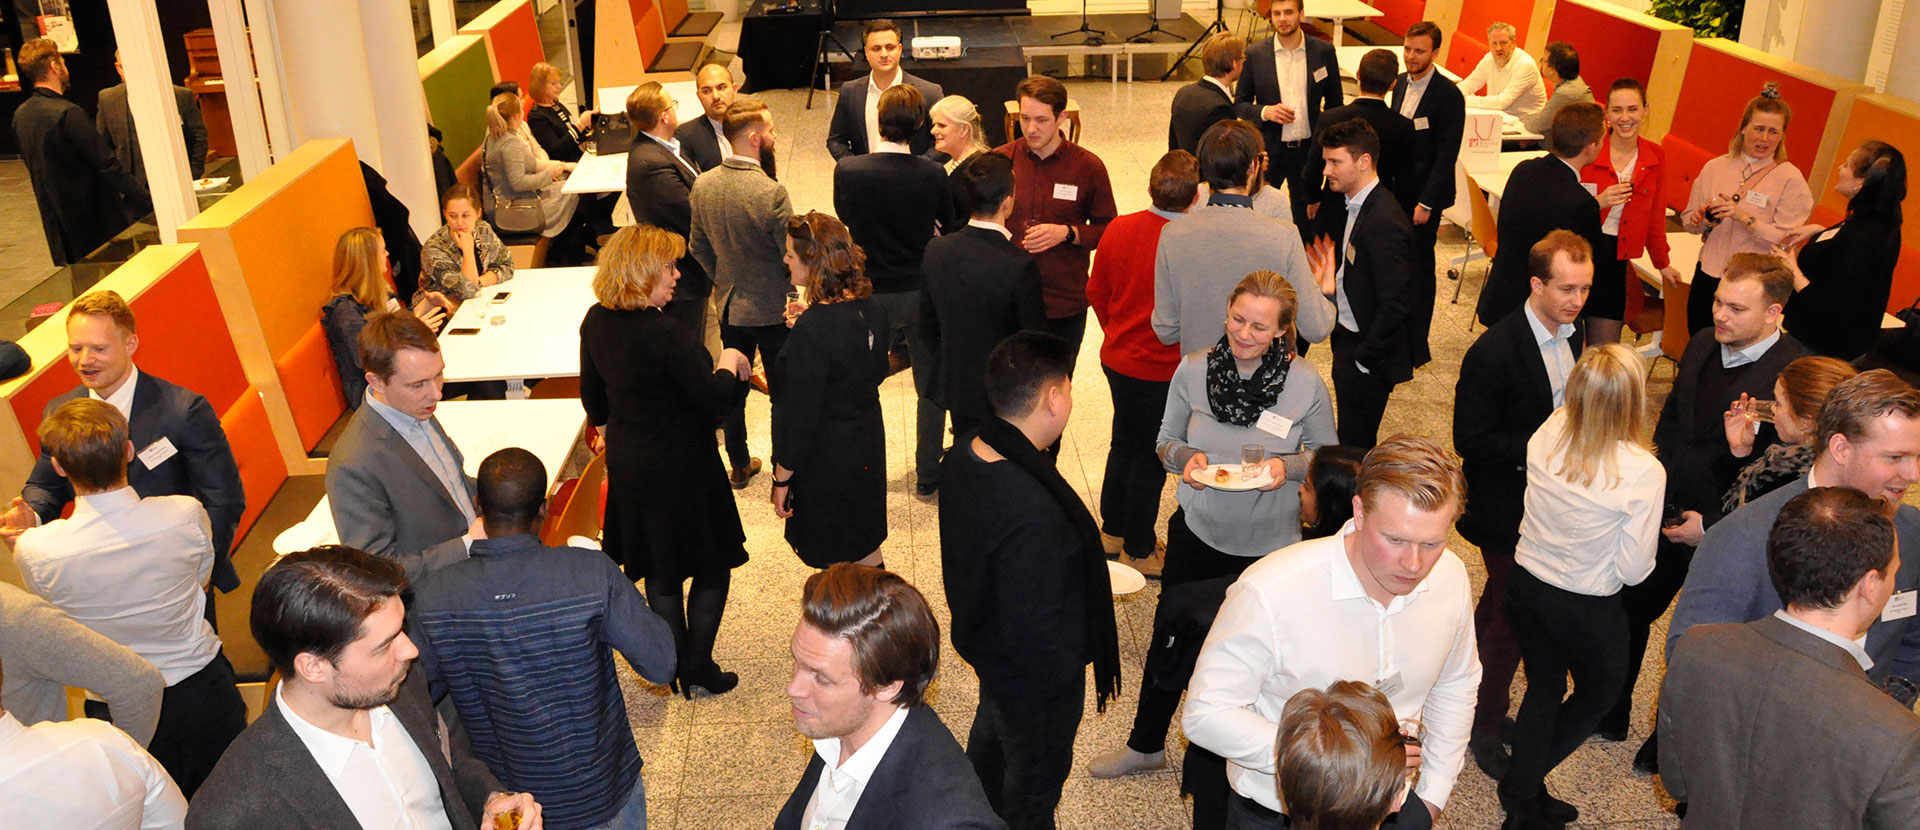 Guests at our alumni event in Norway